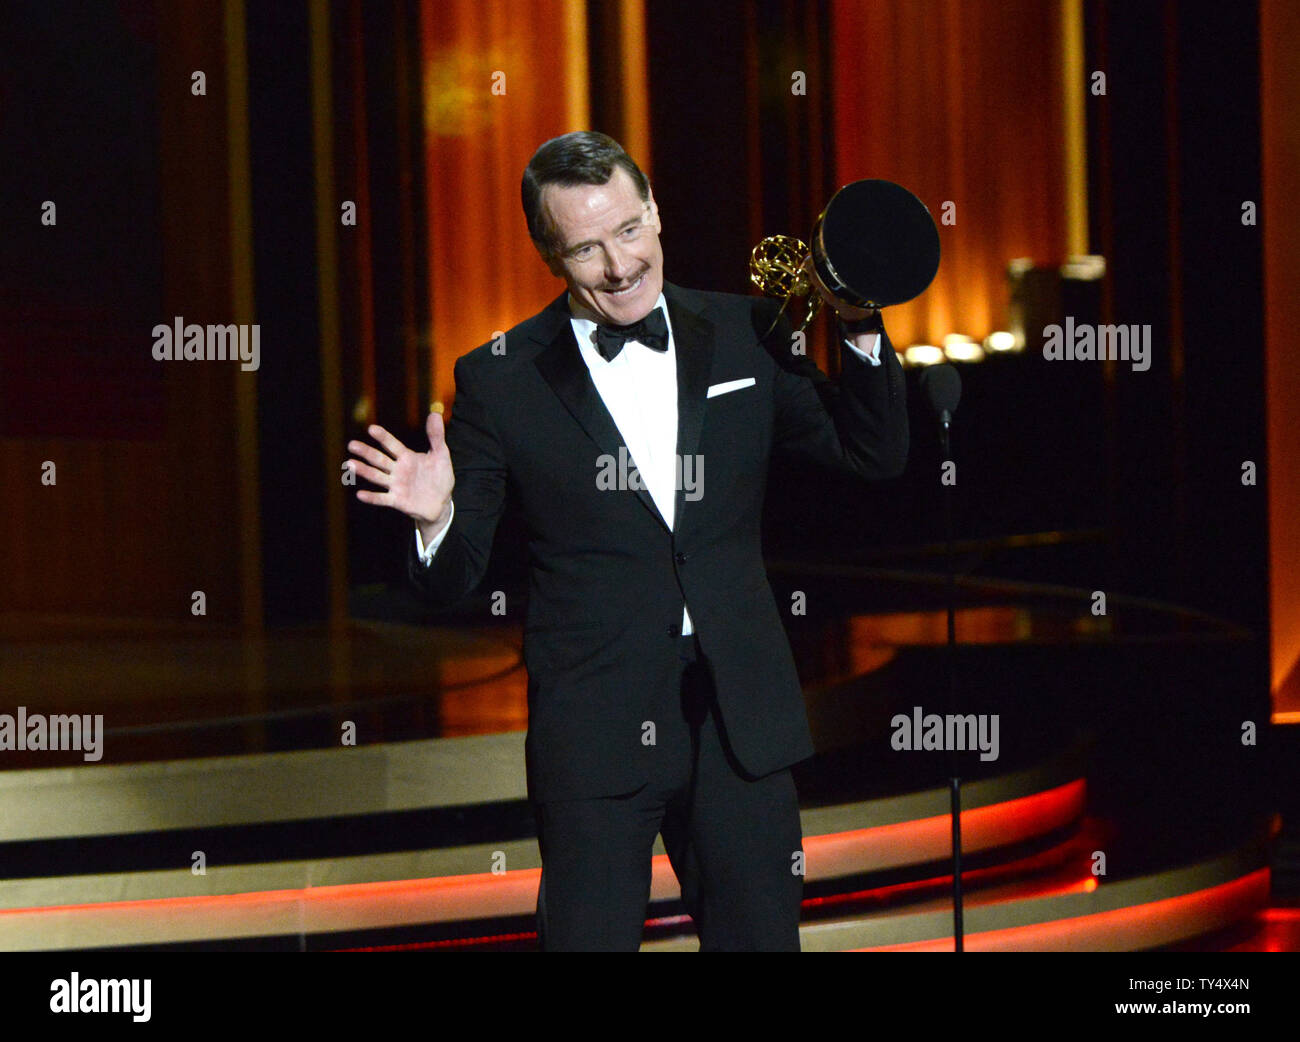 Bryan Cranston accepts the award for outstanding lead actor in a drama series for his work in 'Breaking Bad' during the Primetime Emmy Awards at the Nokia Theatre in Los Angeles on August 25, 2014.     UPI/Pat Benic Stock Photo